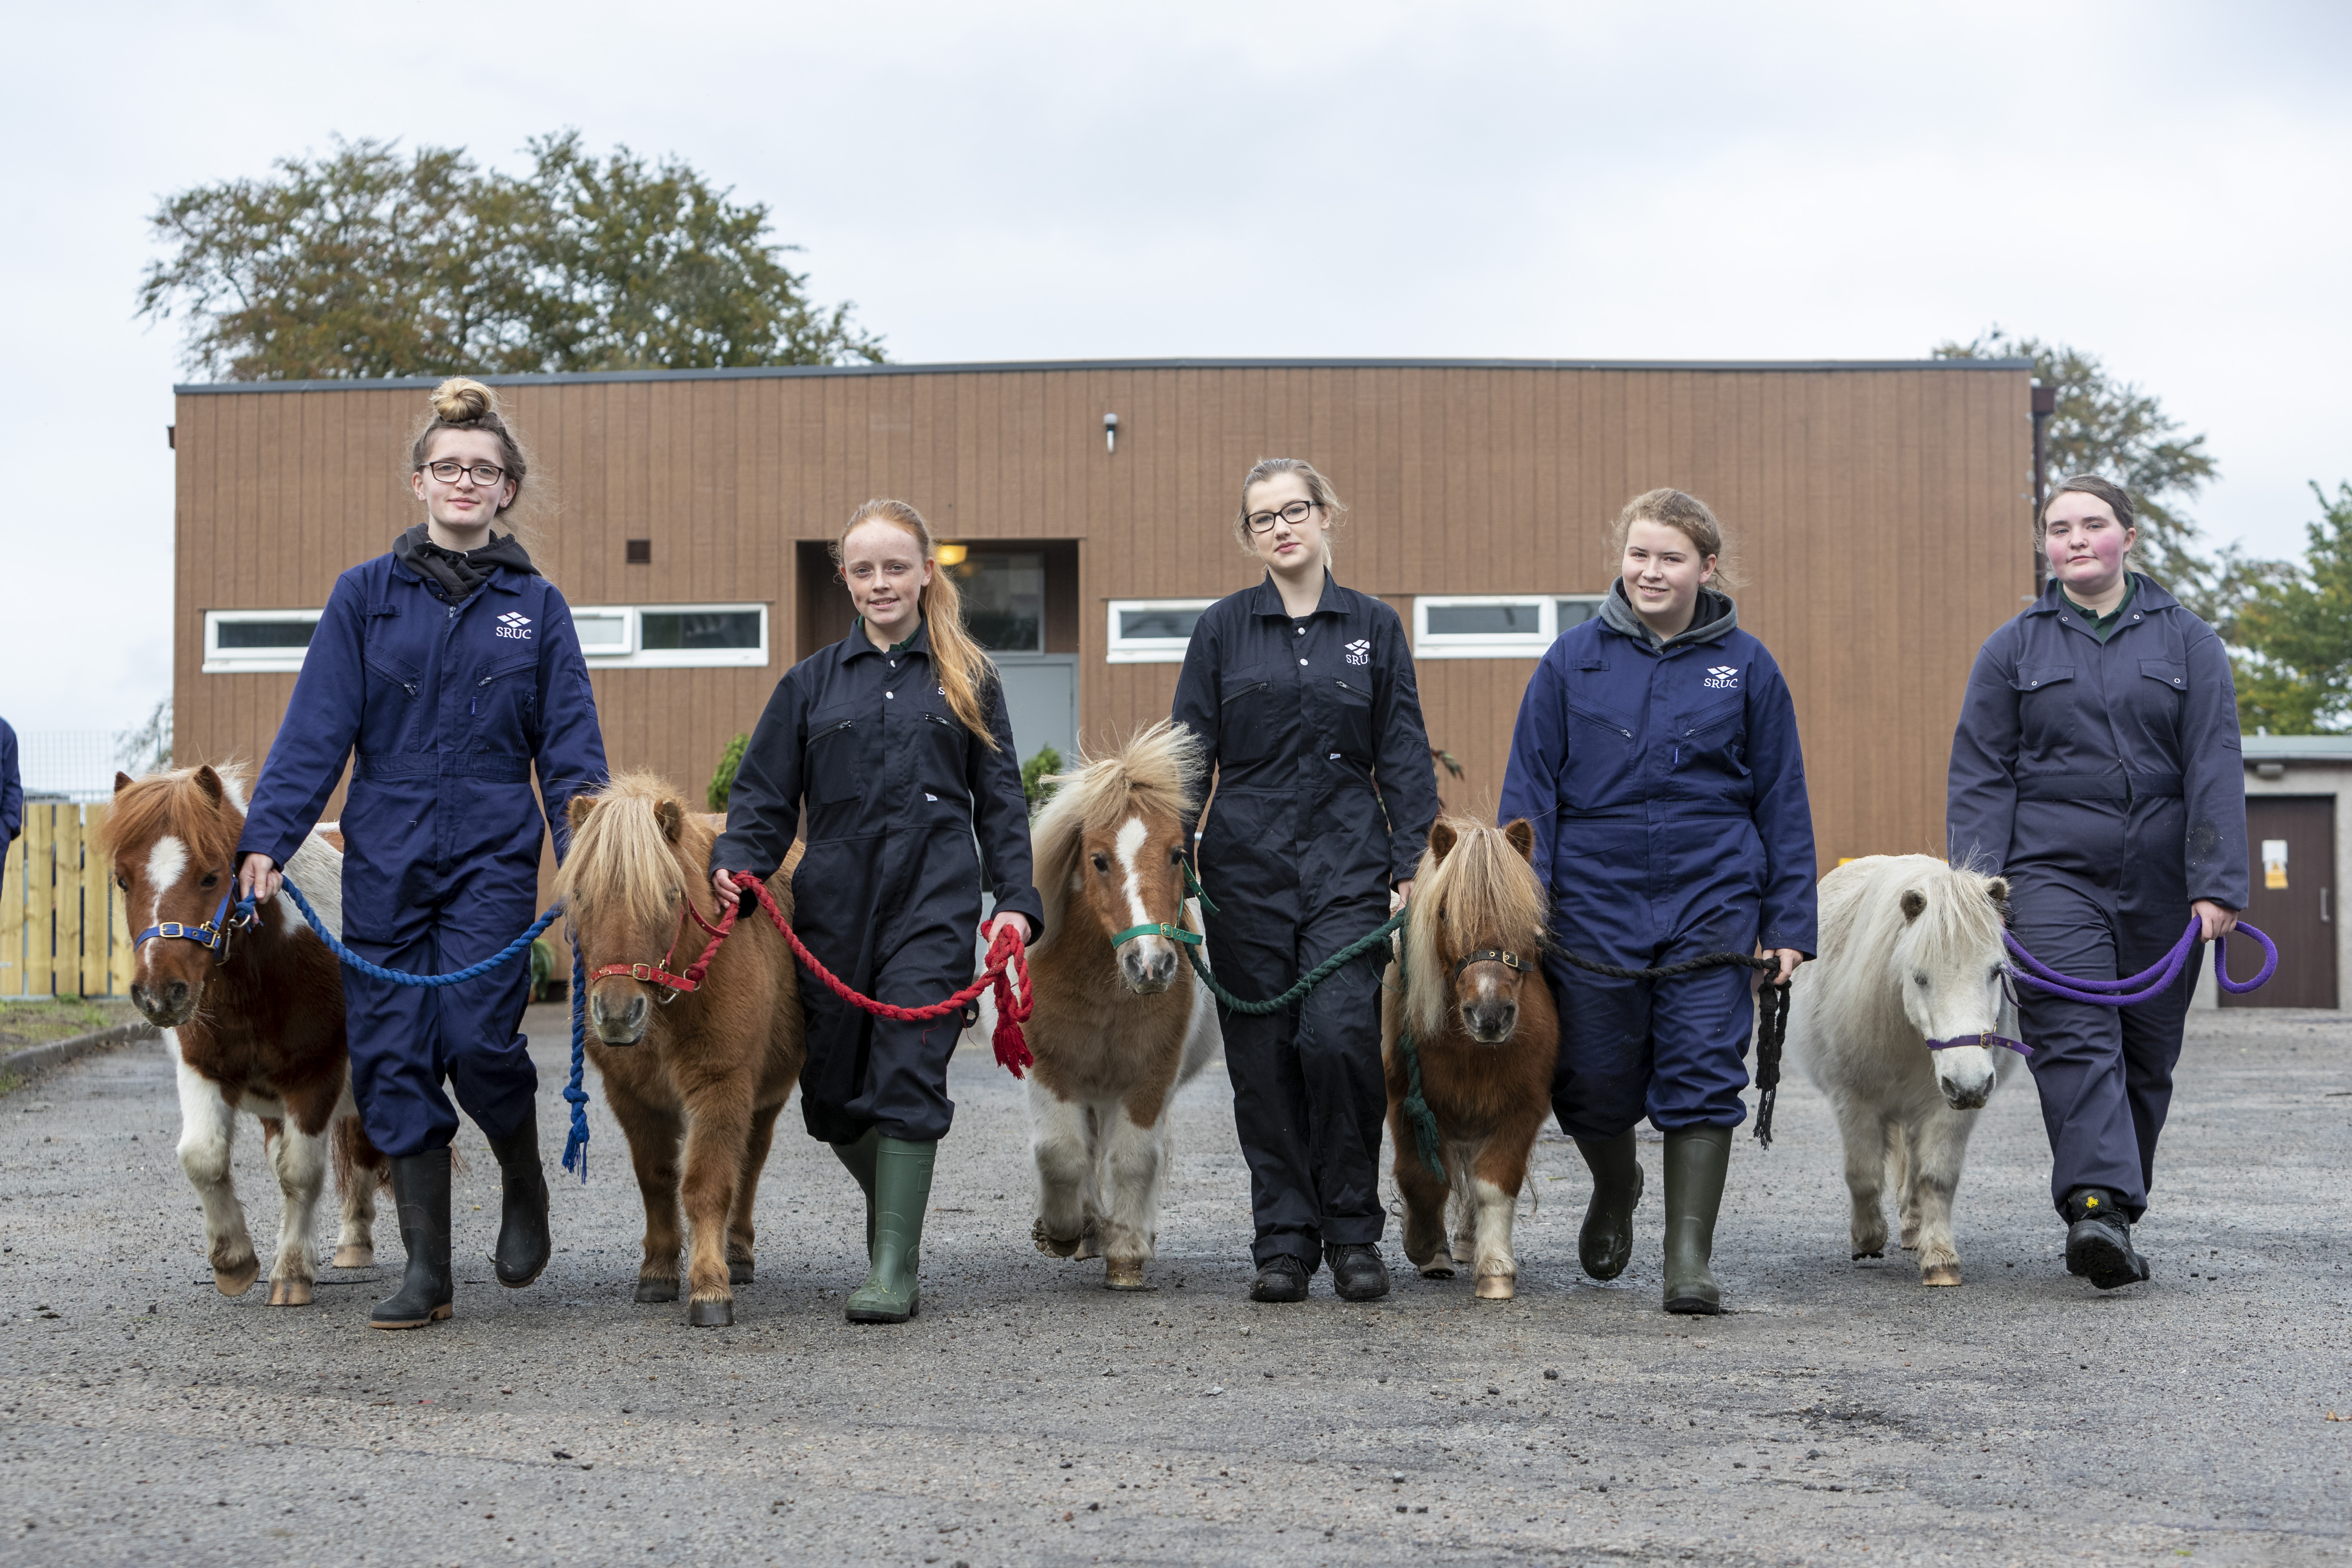 Students and animals at Scotland’s Rural College (SRUC) in Aberdeen are celebrating the opening of a new £350,000 home for creatures – great and small.